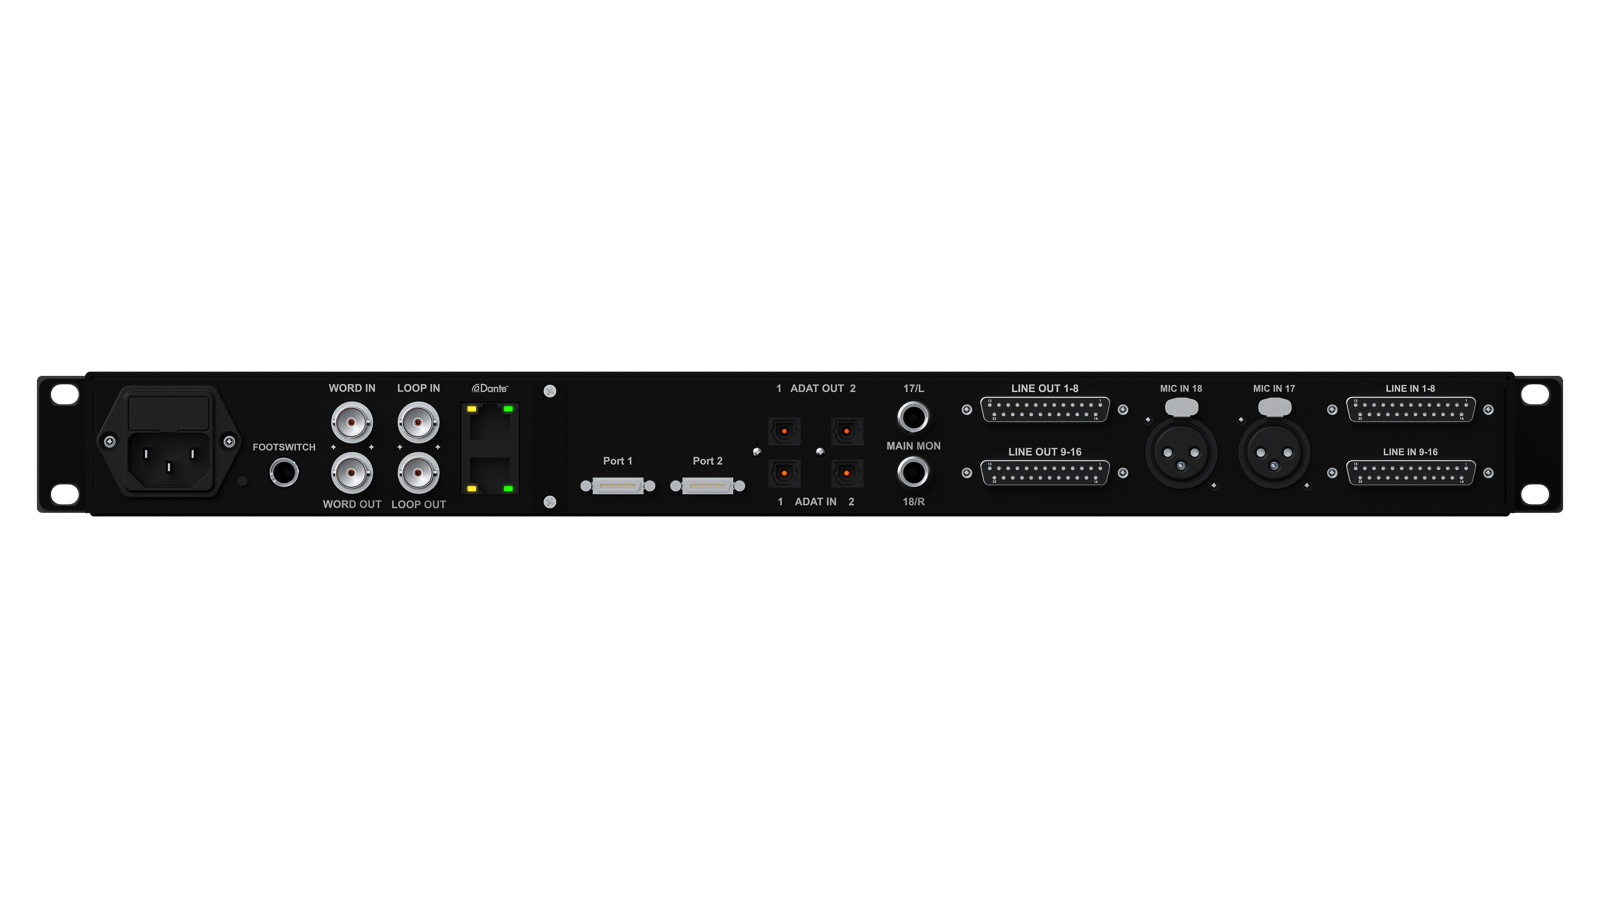 Avid Mtrx Studio - Avid interfaces and controllers - Variation 2